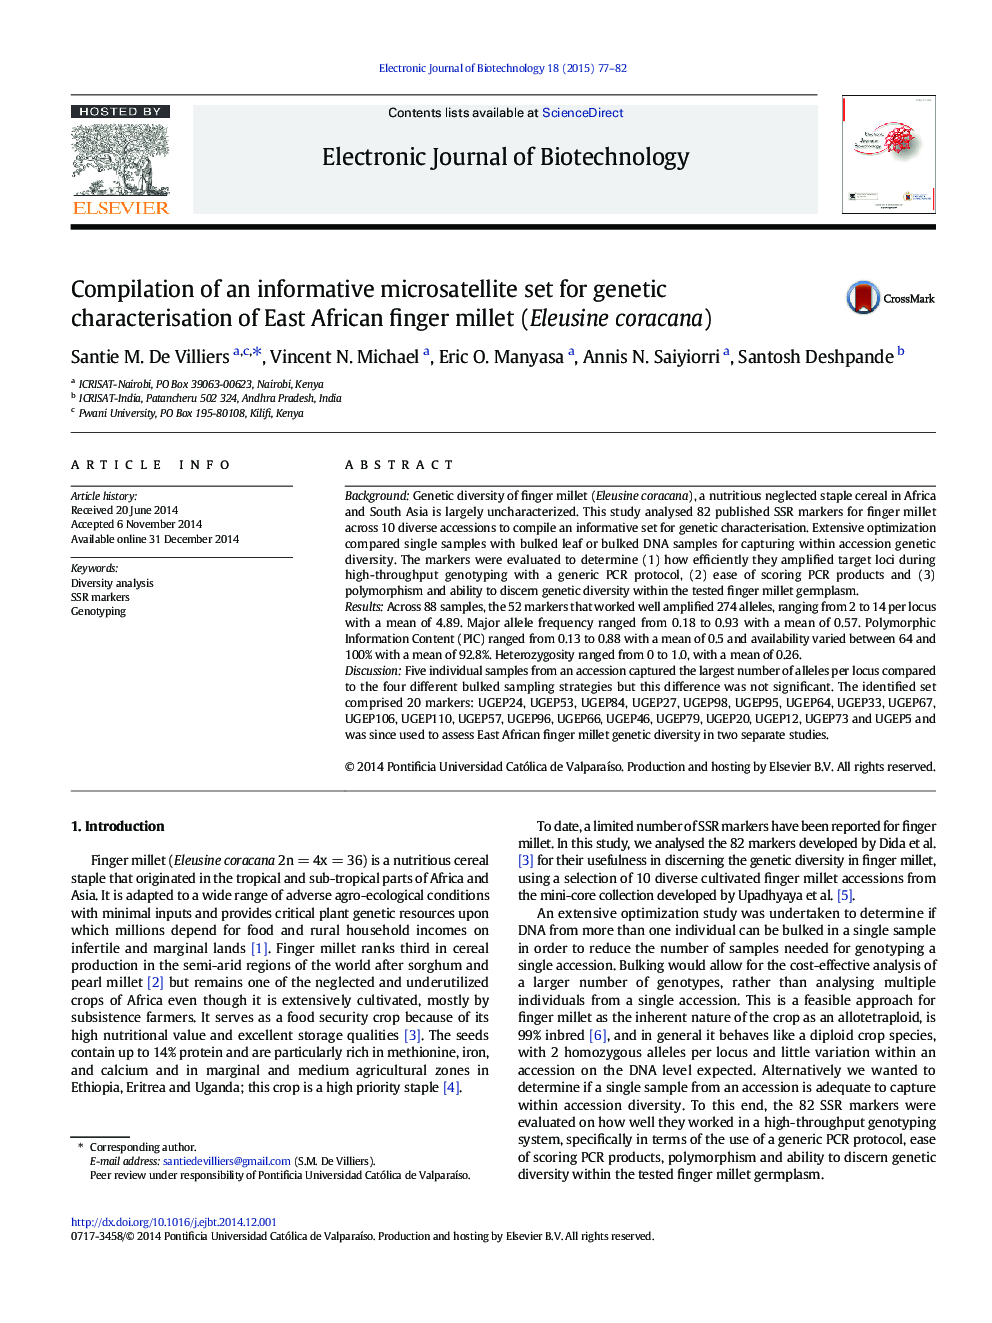 Compilation of an informative microsatellite set for genetic characterisation of East African finger millet (Eleusine coracana) 